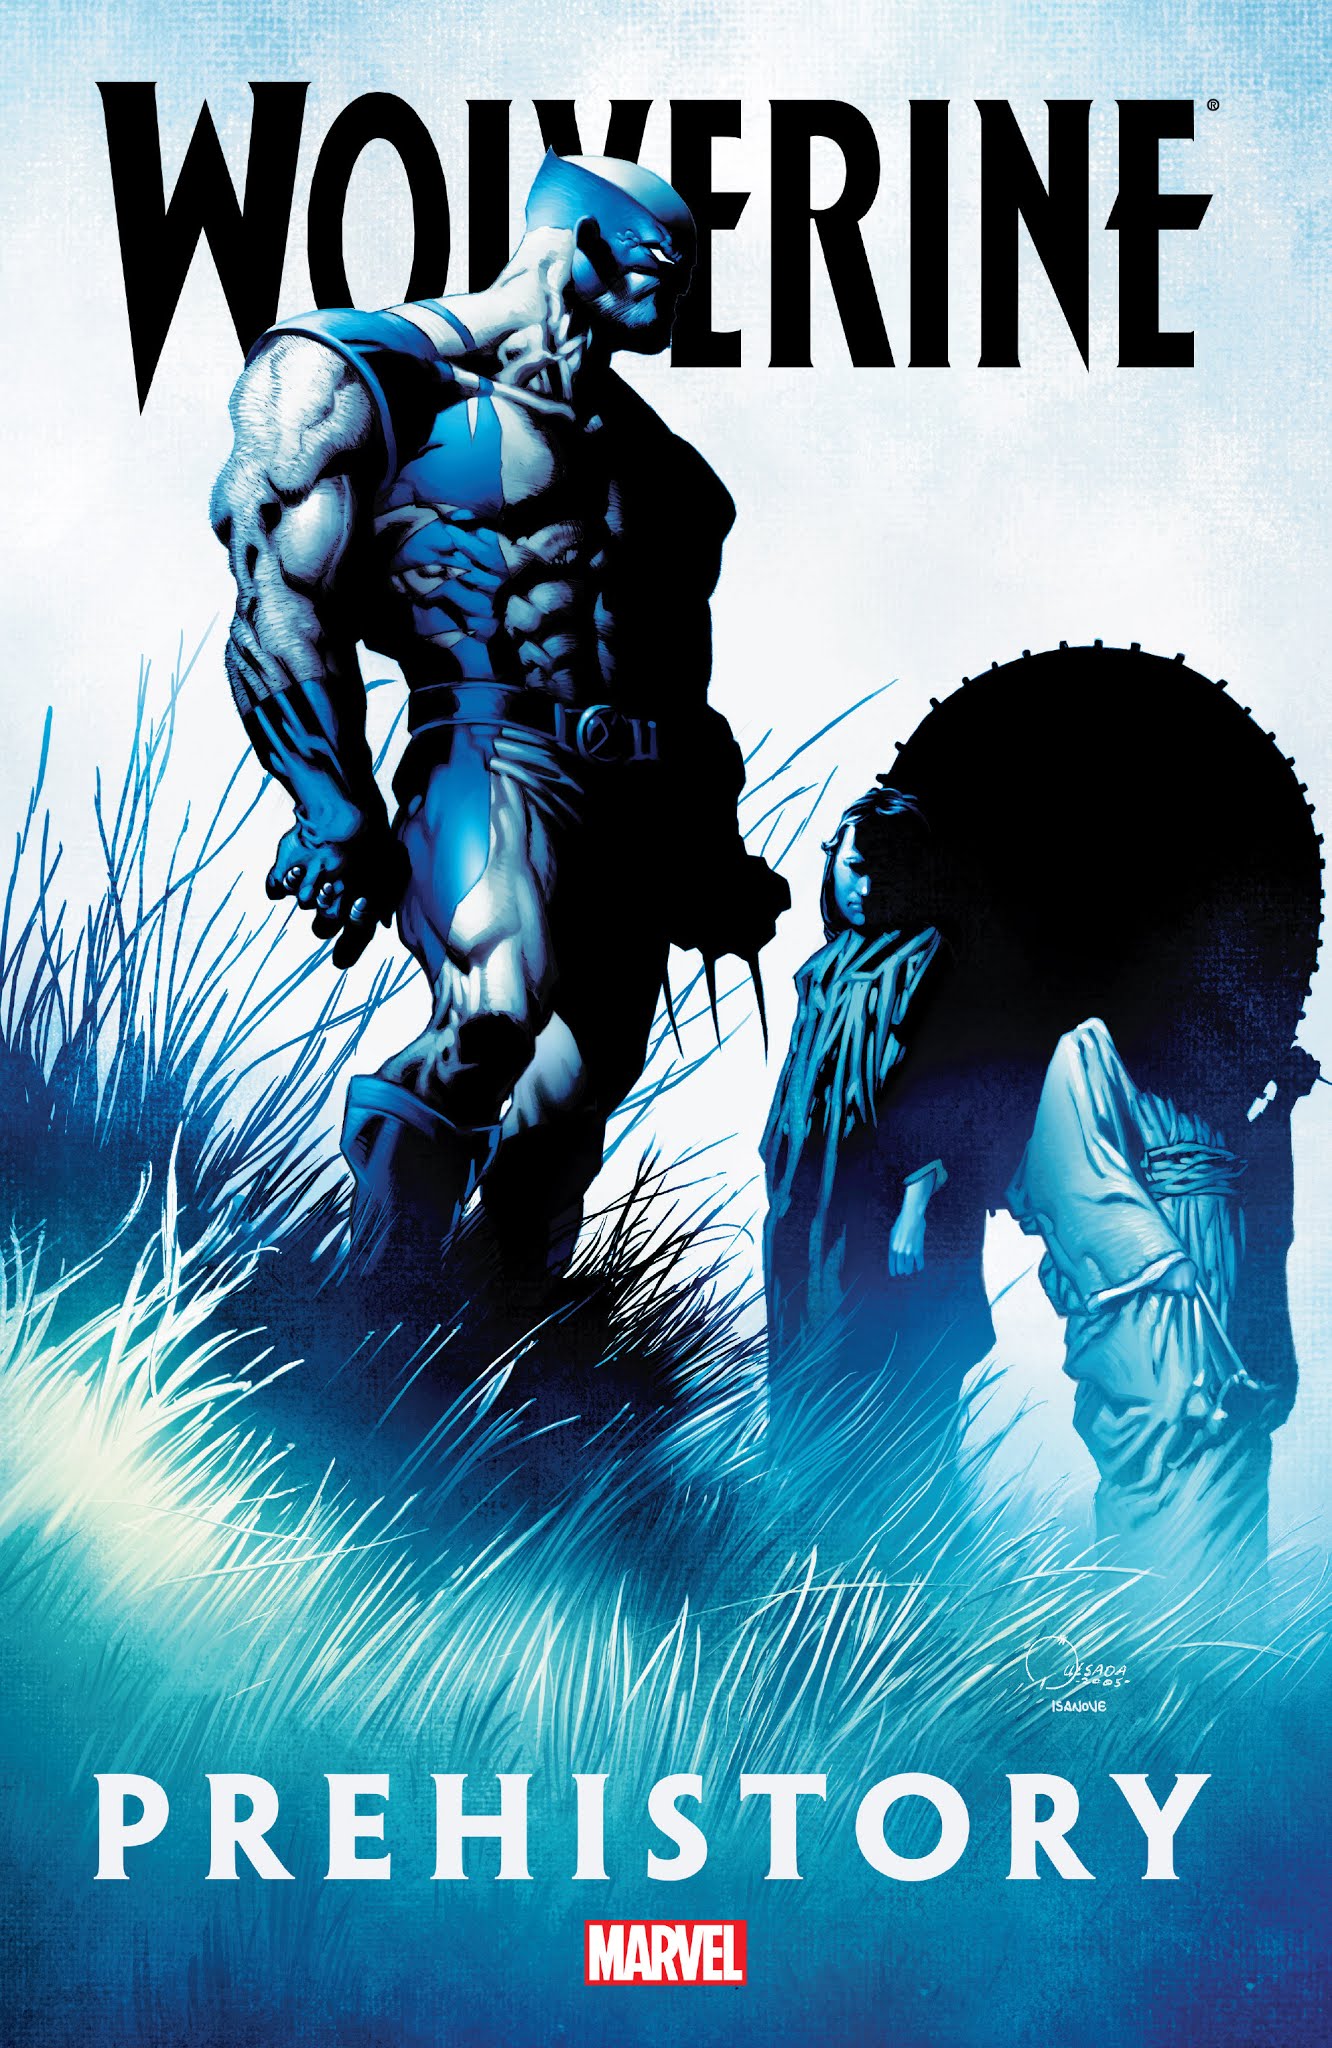 Read online Wolverine: Prehistory comic -  Issue # TPB (Part 1) - 1